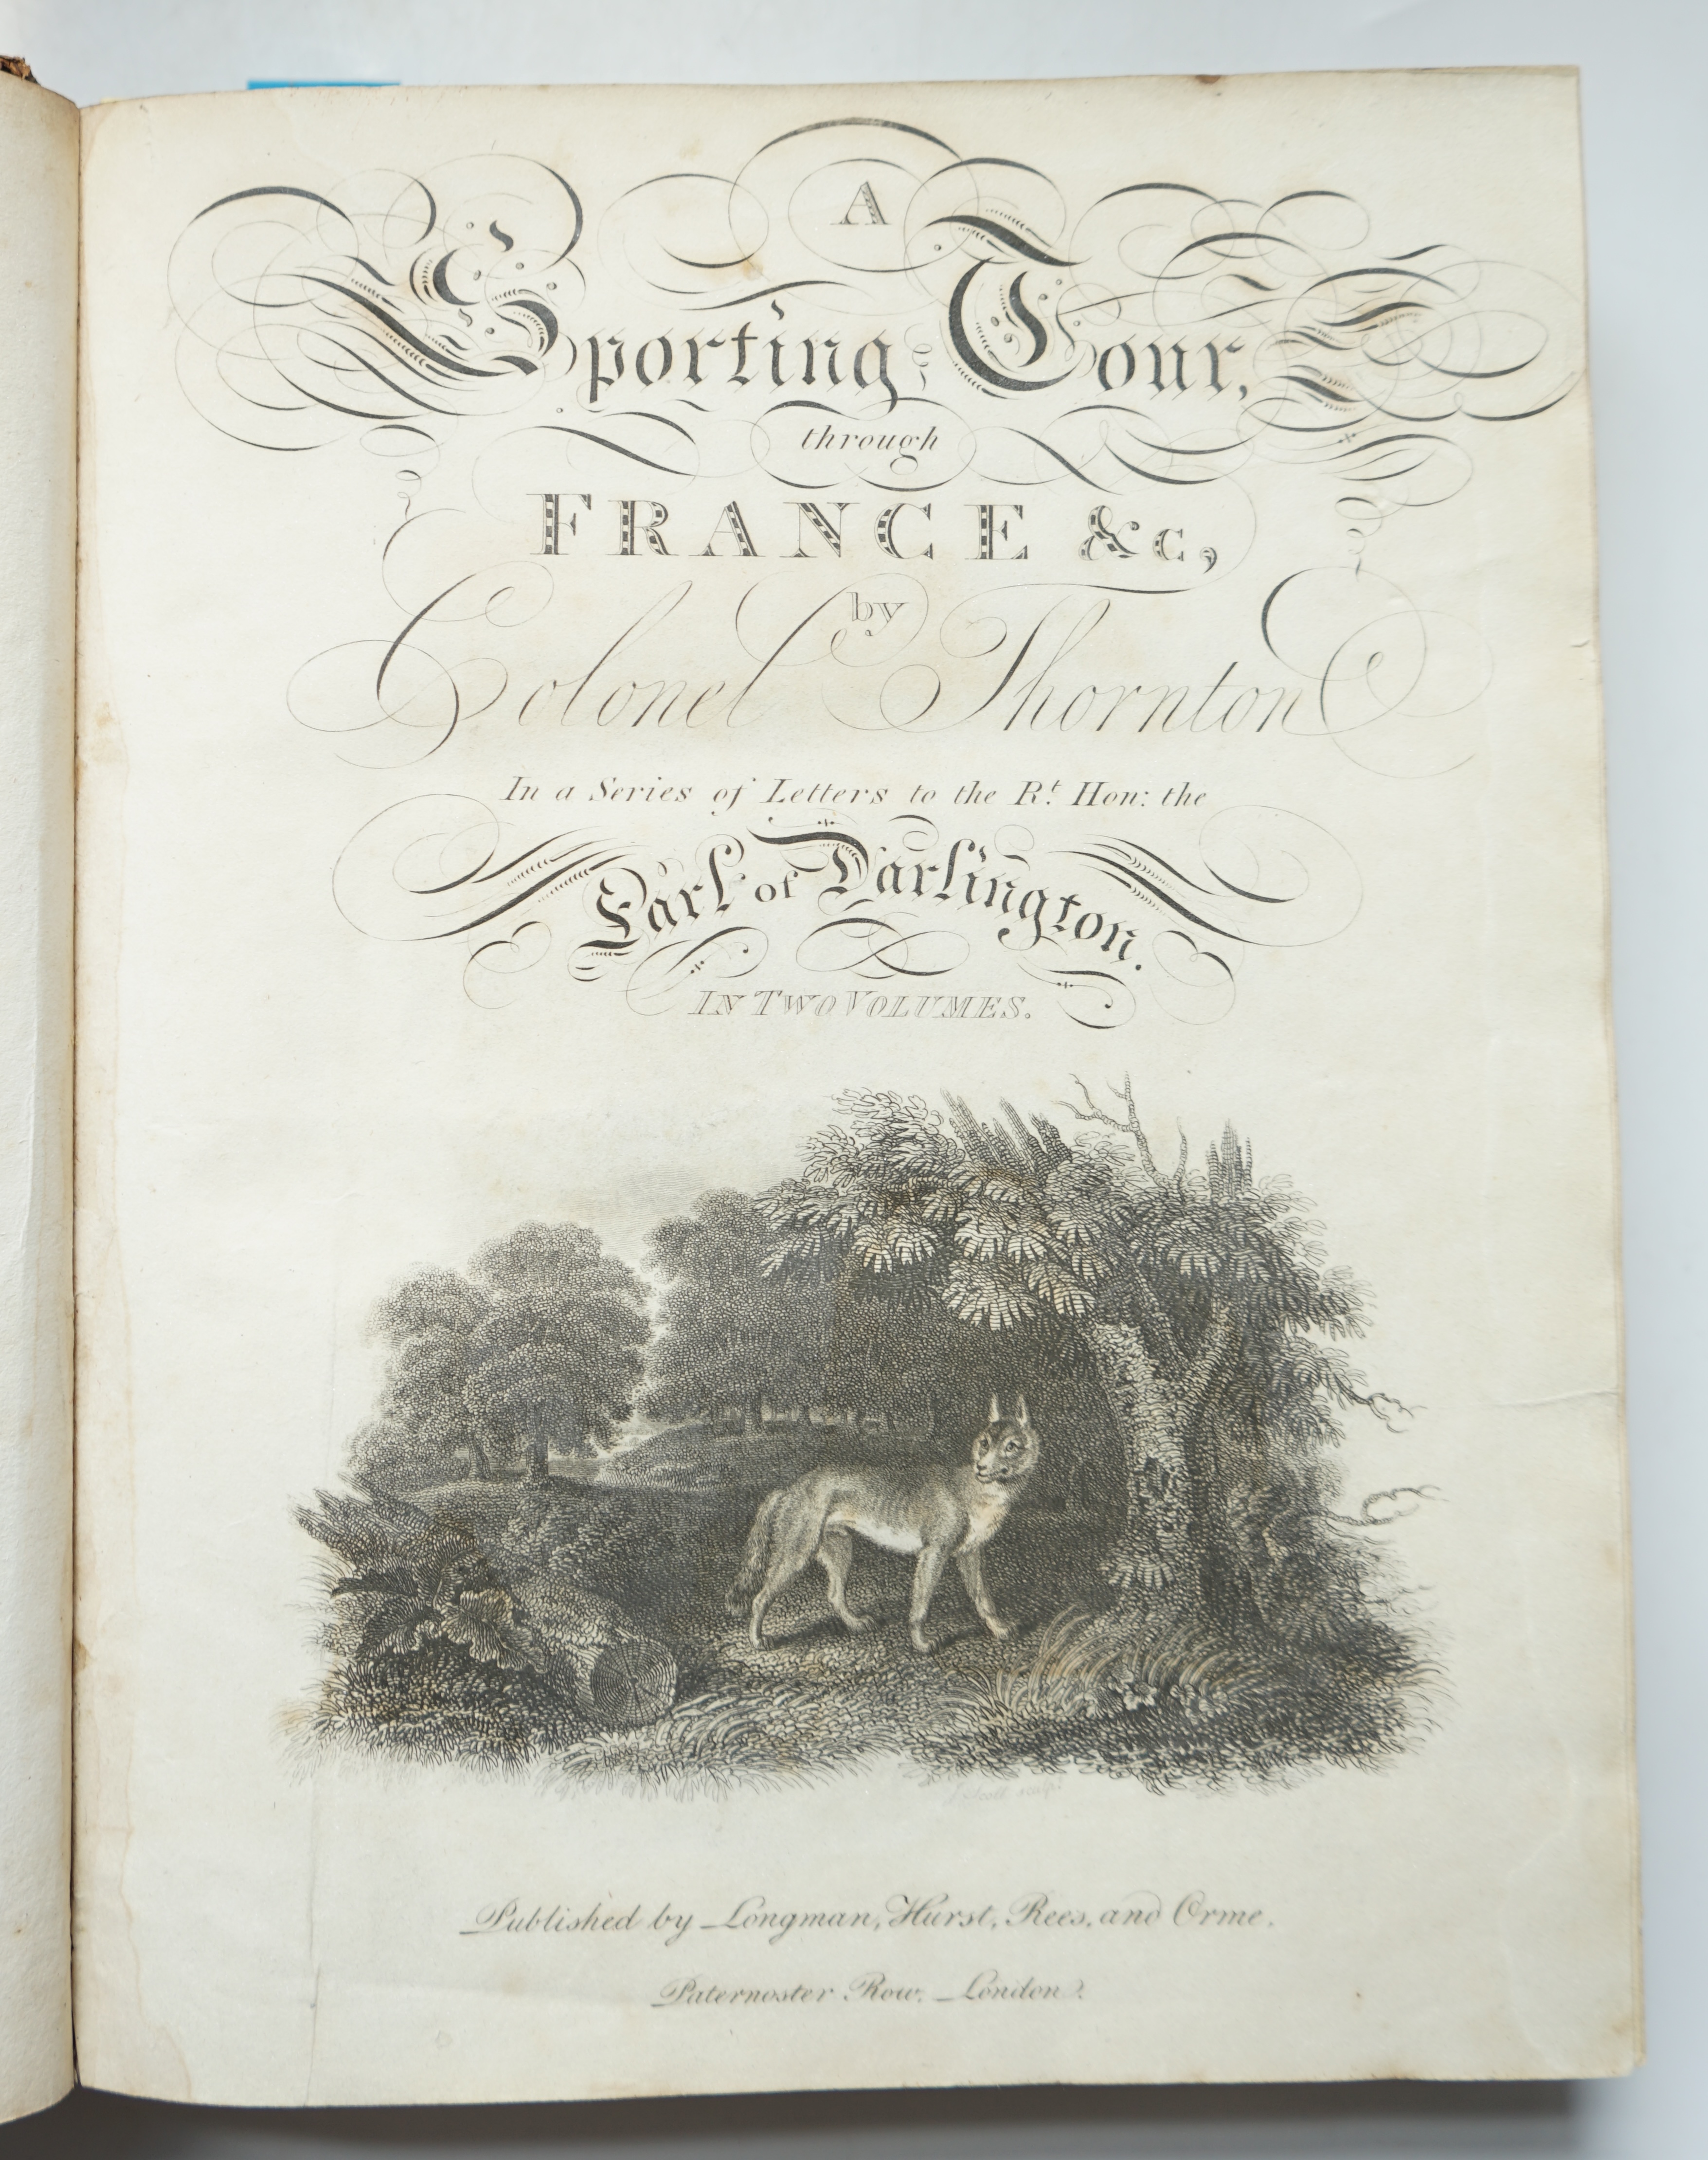 Thornton, Col. Thomas - A Sporting Tour through various parts of France in the year 1802, 2 vols in 1, 1st edition, 4to, diced calf rebacked, with half title, engraved portrait frontispiece, engraved additional title, 48